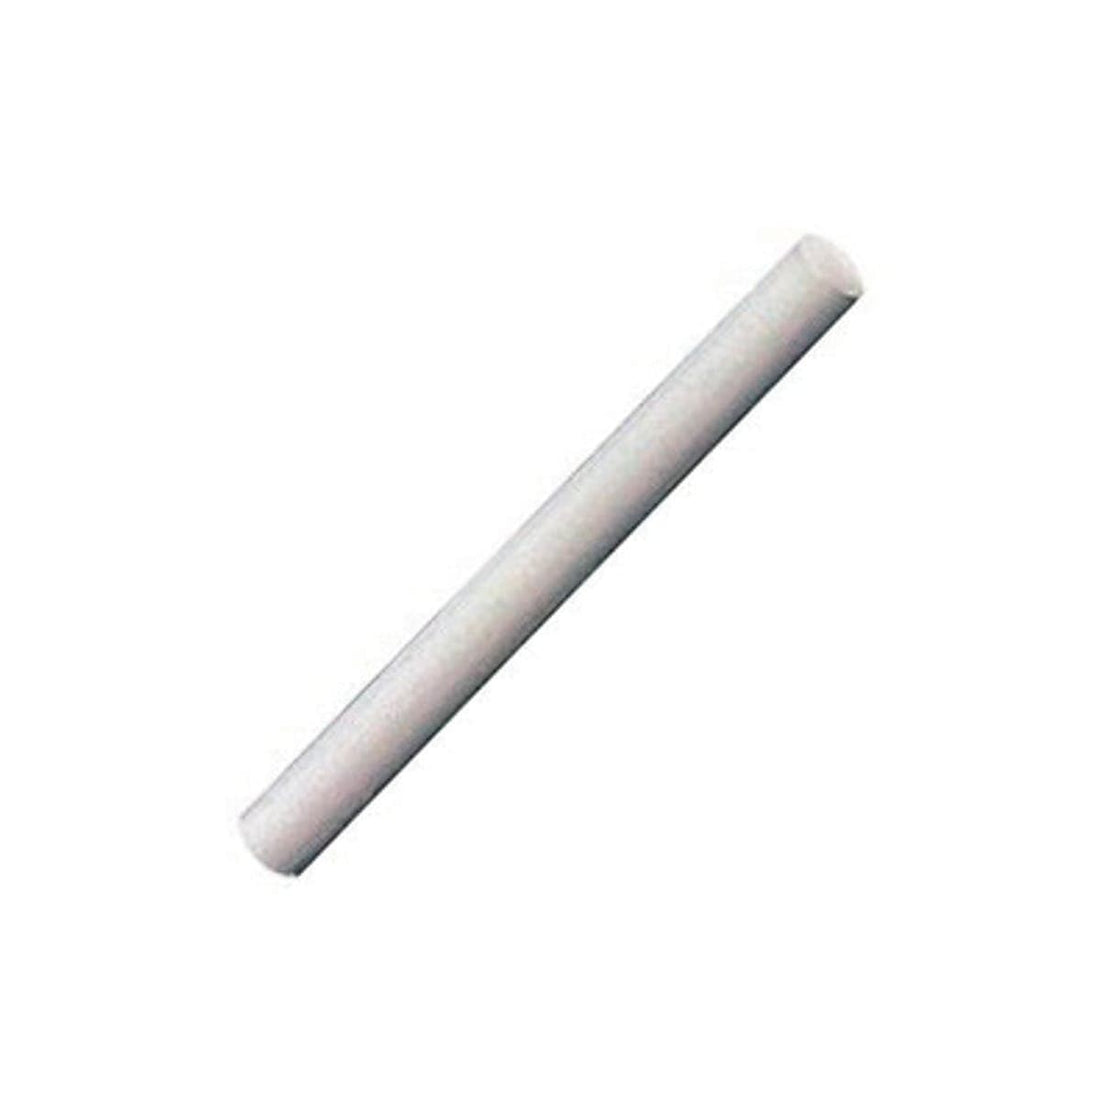 Glue d.12x94mm blister 14 special PVC/CABLE sticks 125g - best price from Maltashopper.com BR400230169